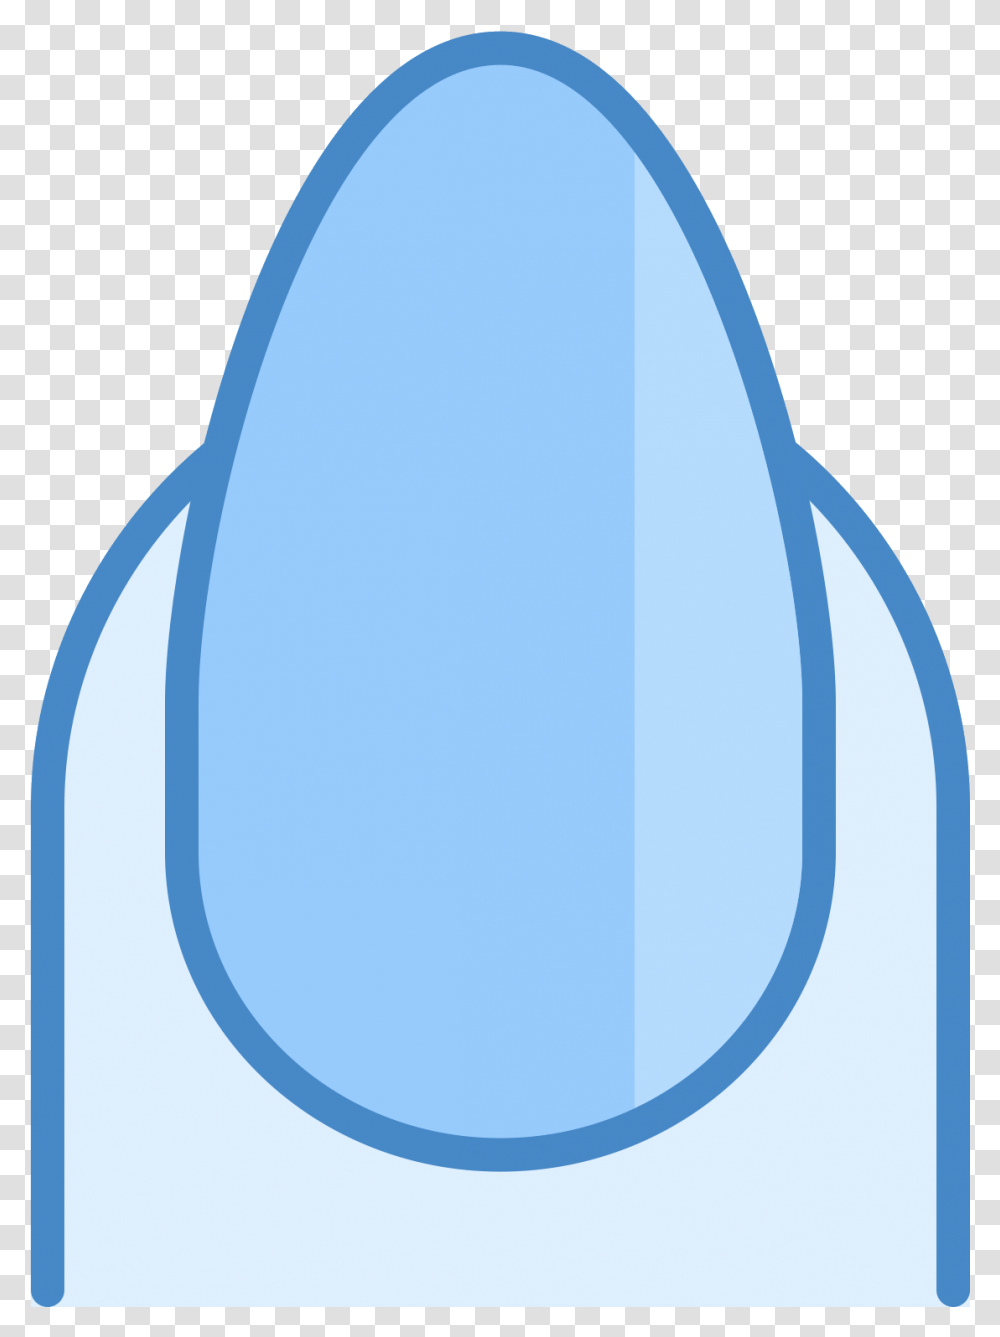 It's The Image Of A Long Polished Fingernail And The Pbs Kids Go, Animal, Bird, Penguin, Jug Transparent Png